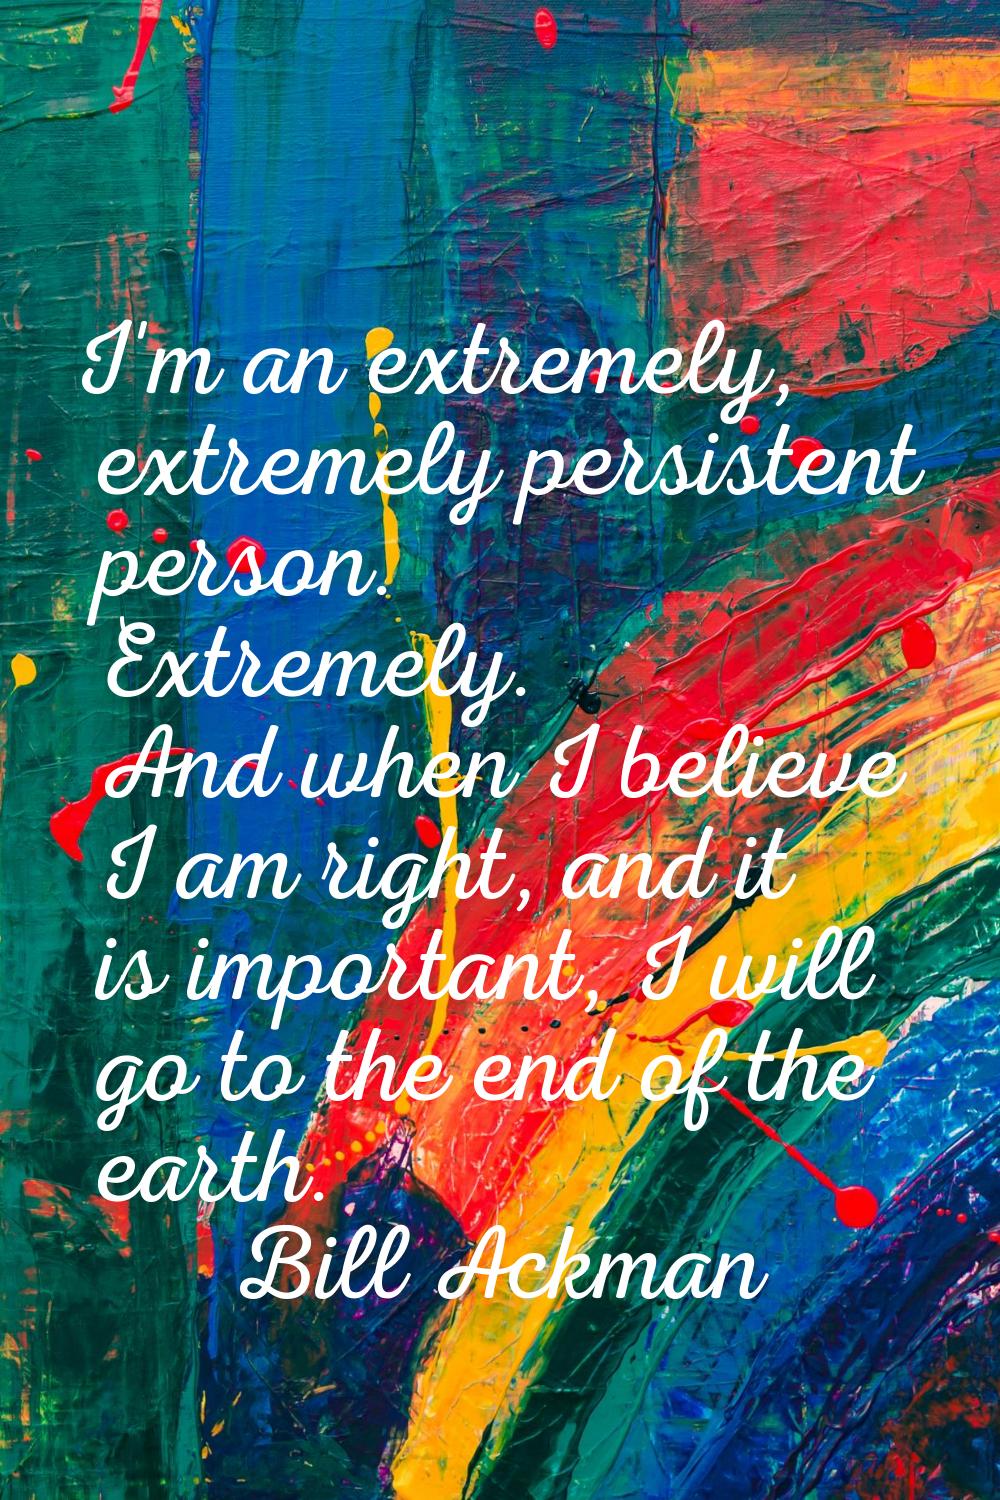 I'm an extremely, extremely persistent person. Extremely. And when I believe I am right, and it is 